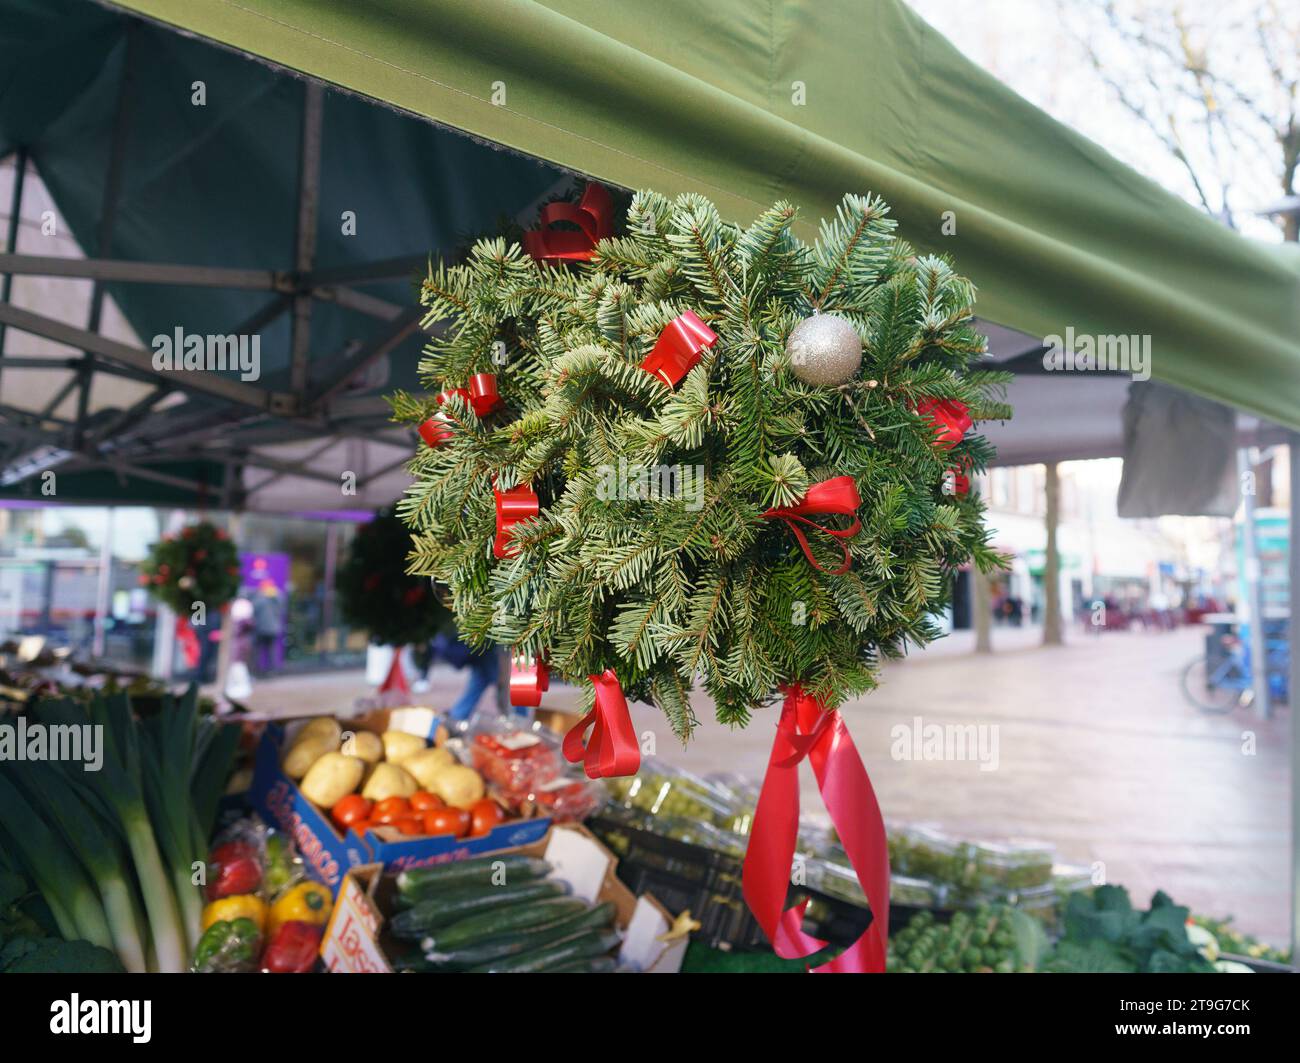 Christmas wreath on display on a market store Stock Photo